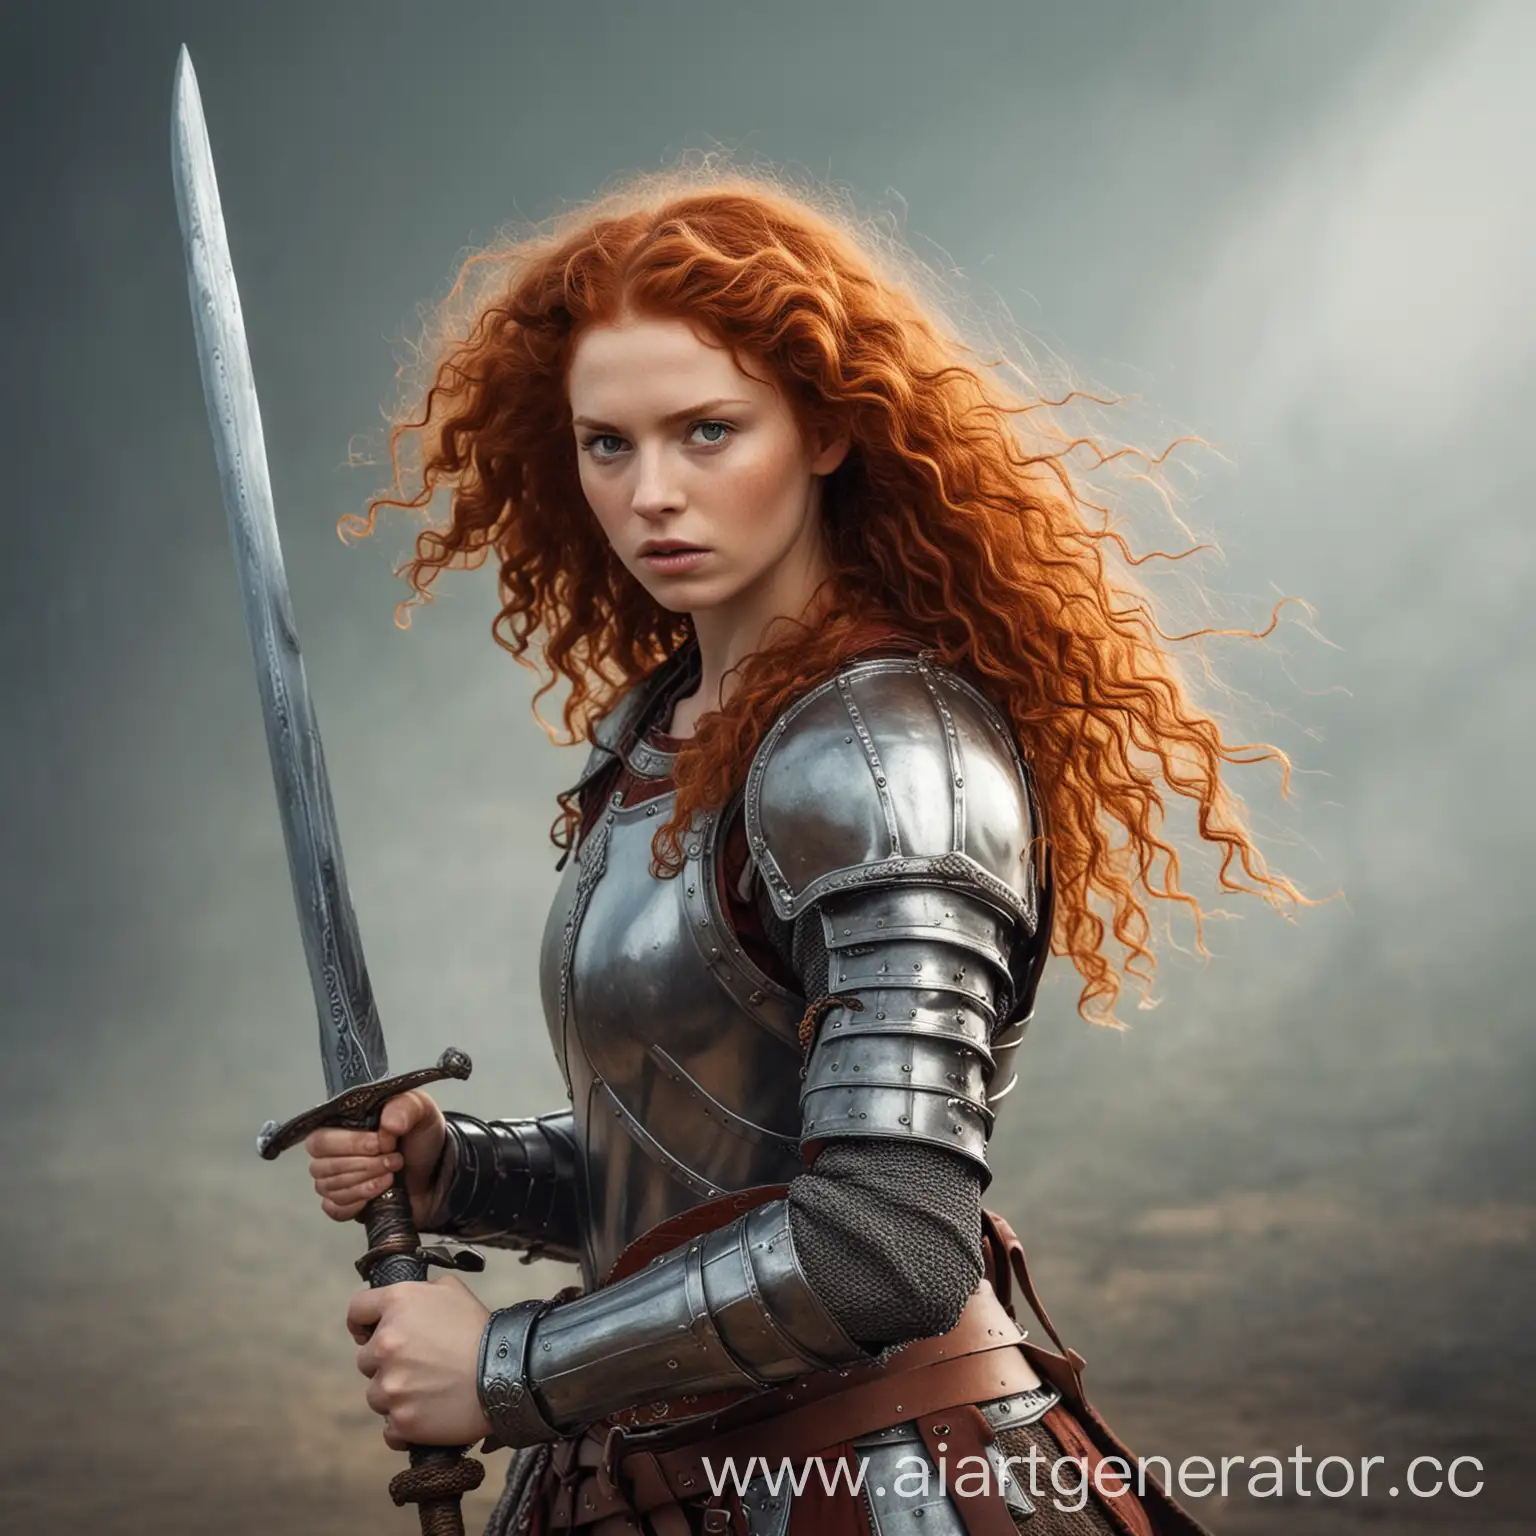 Medieval-Warrior-Woman-with-Curly-Red-Hair-in-Battle